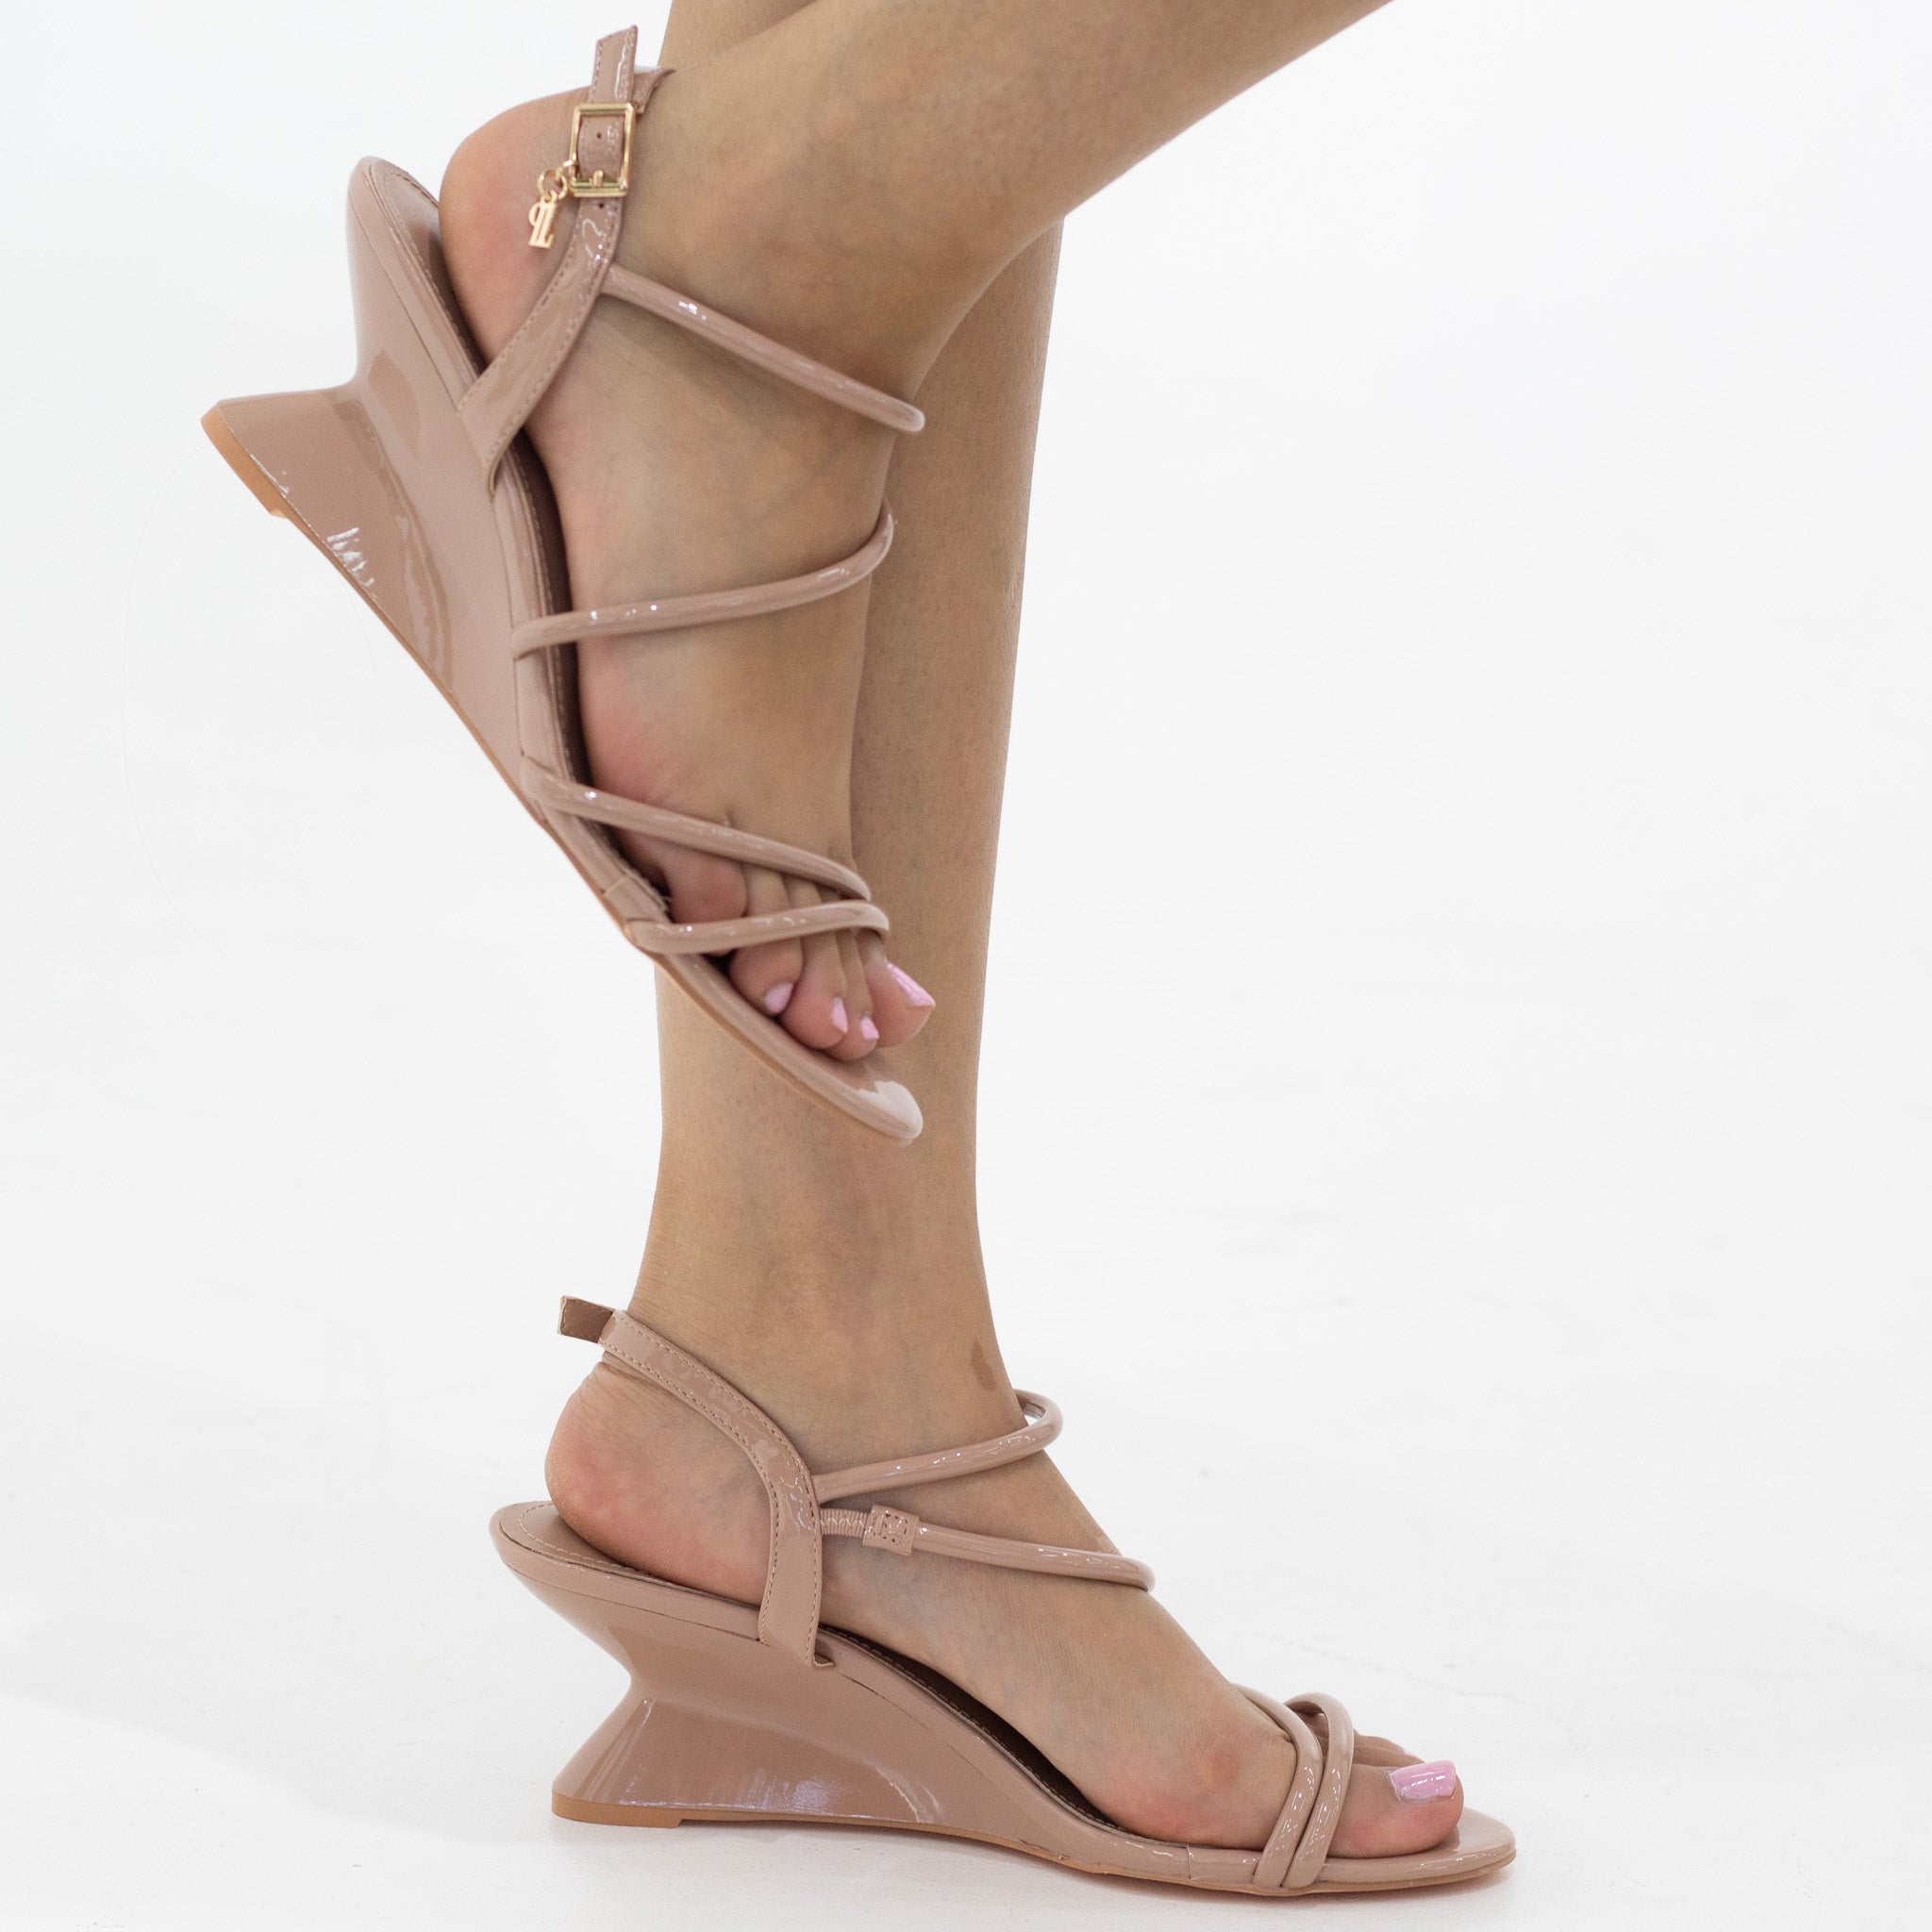 Sting double band special 6.5cm wedge sandals nude